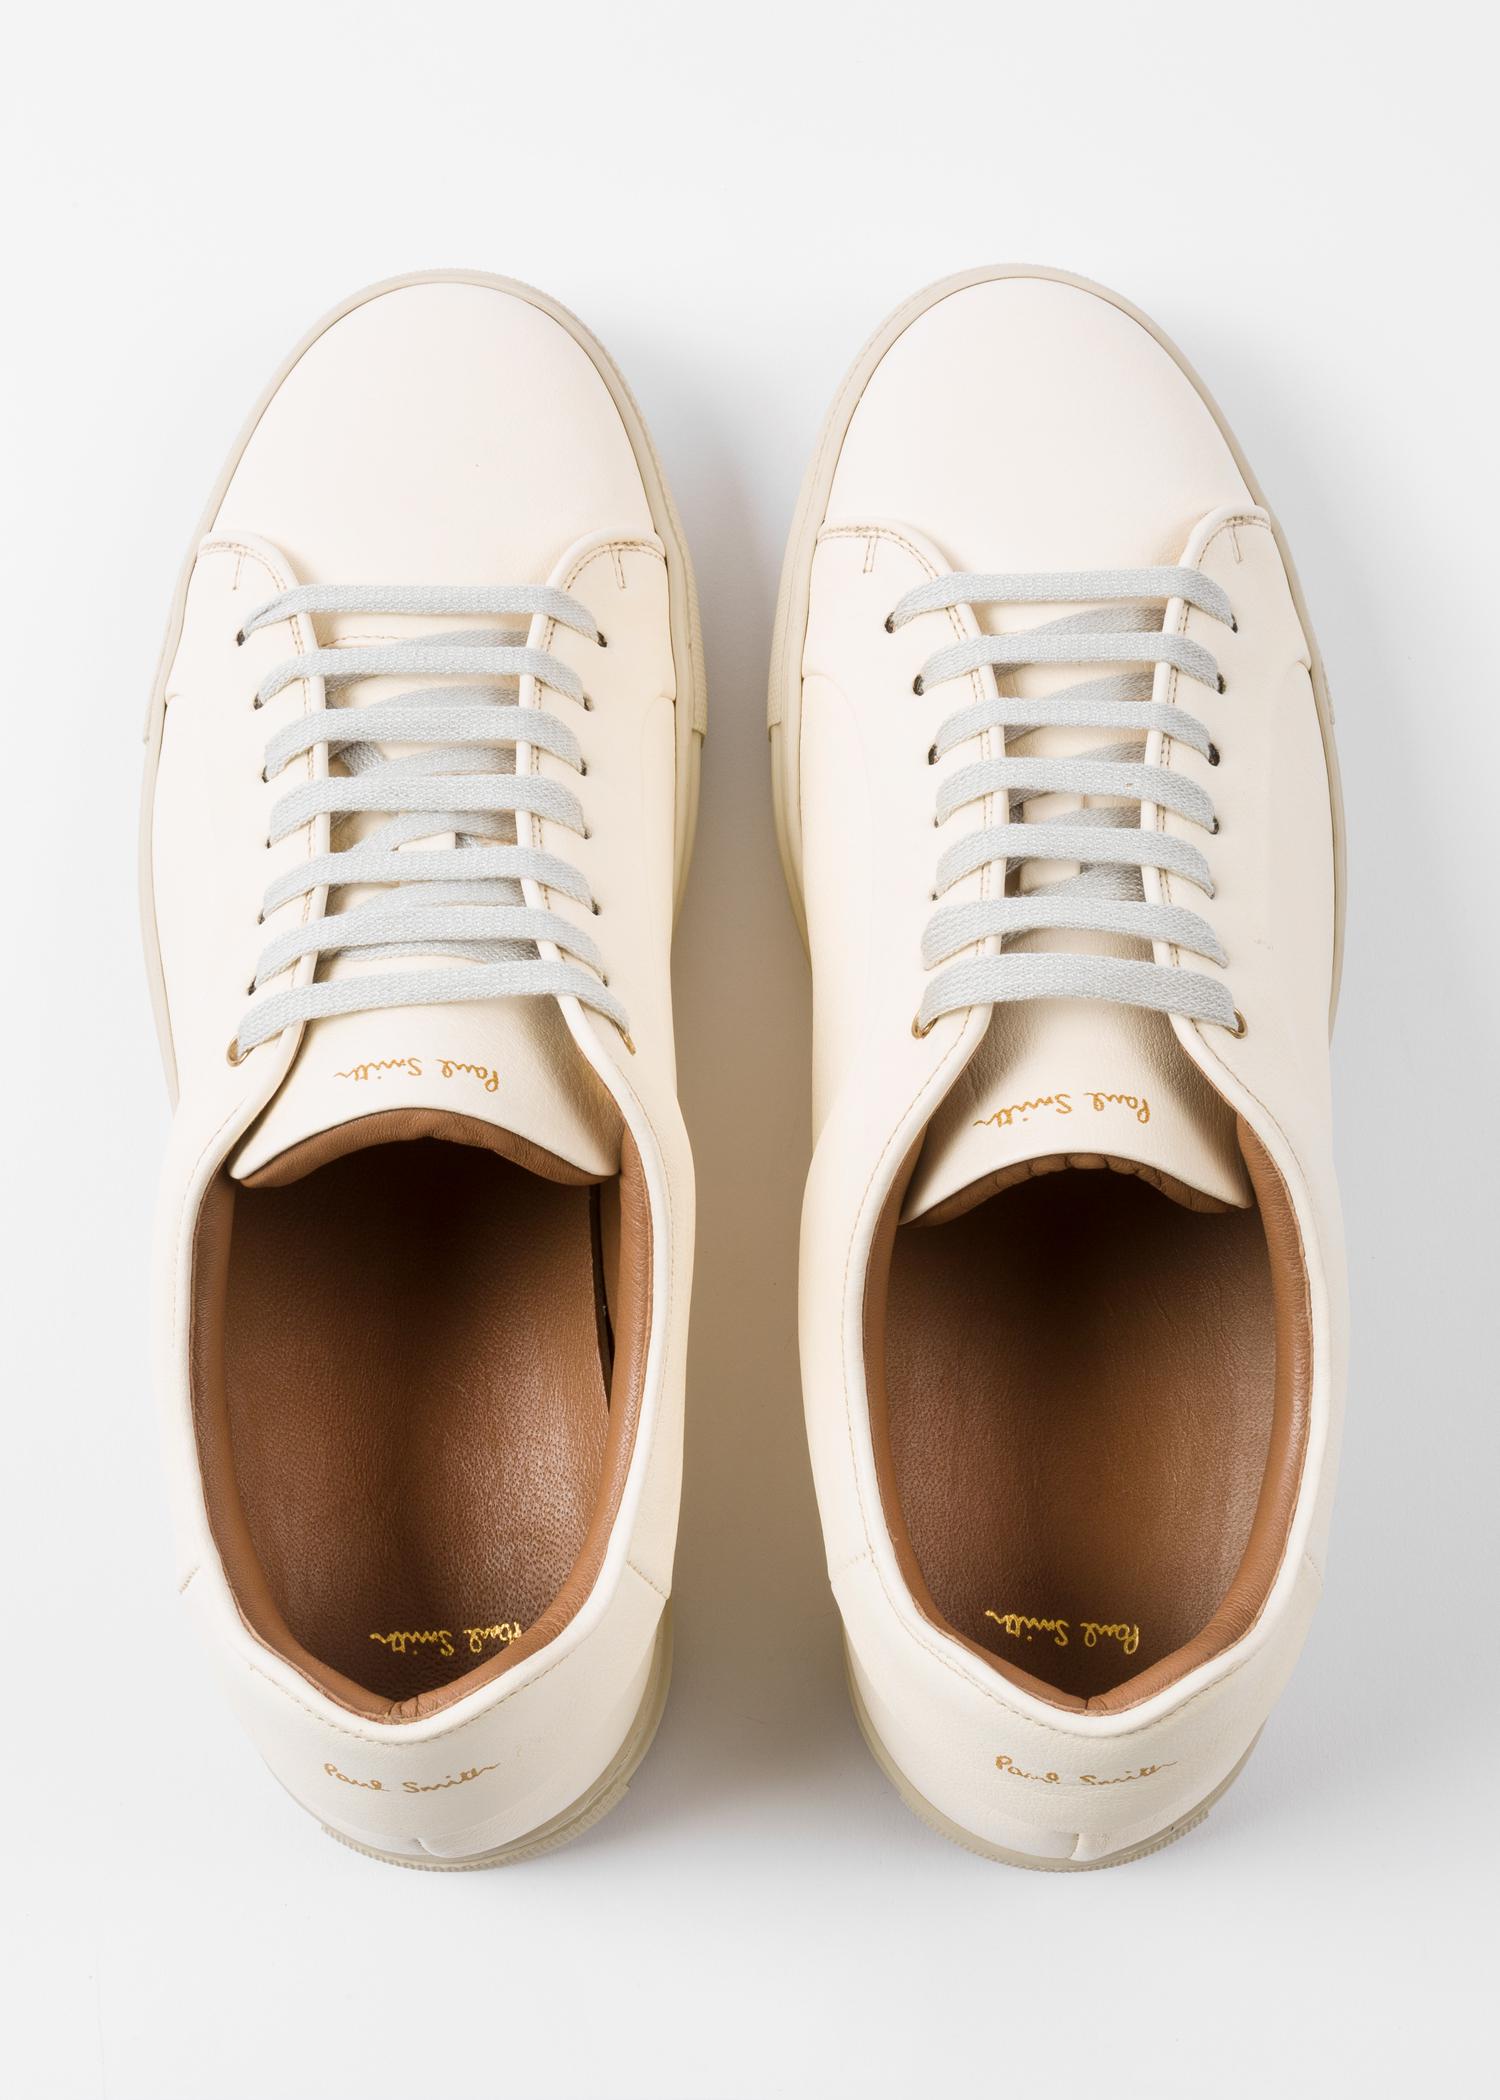 Paul Smith Cream Leather 'Basso' Trainers in Natural for Men - Lyst